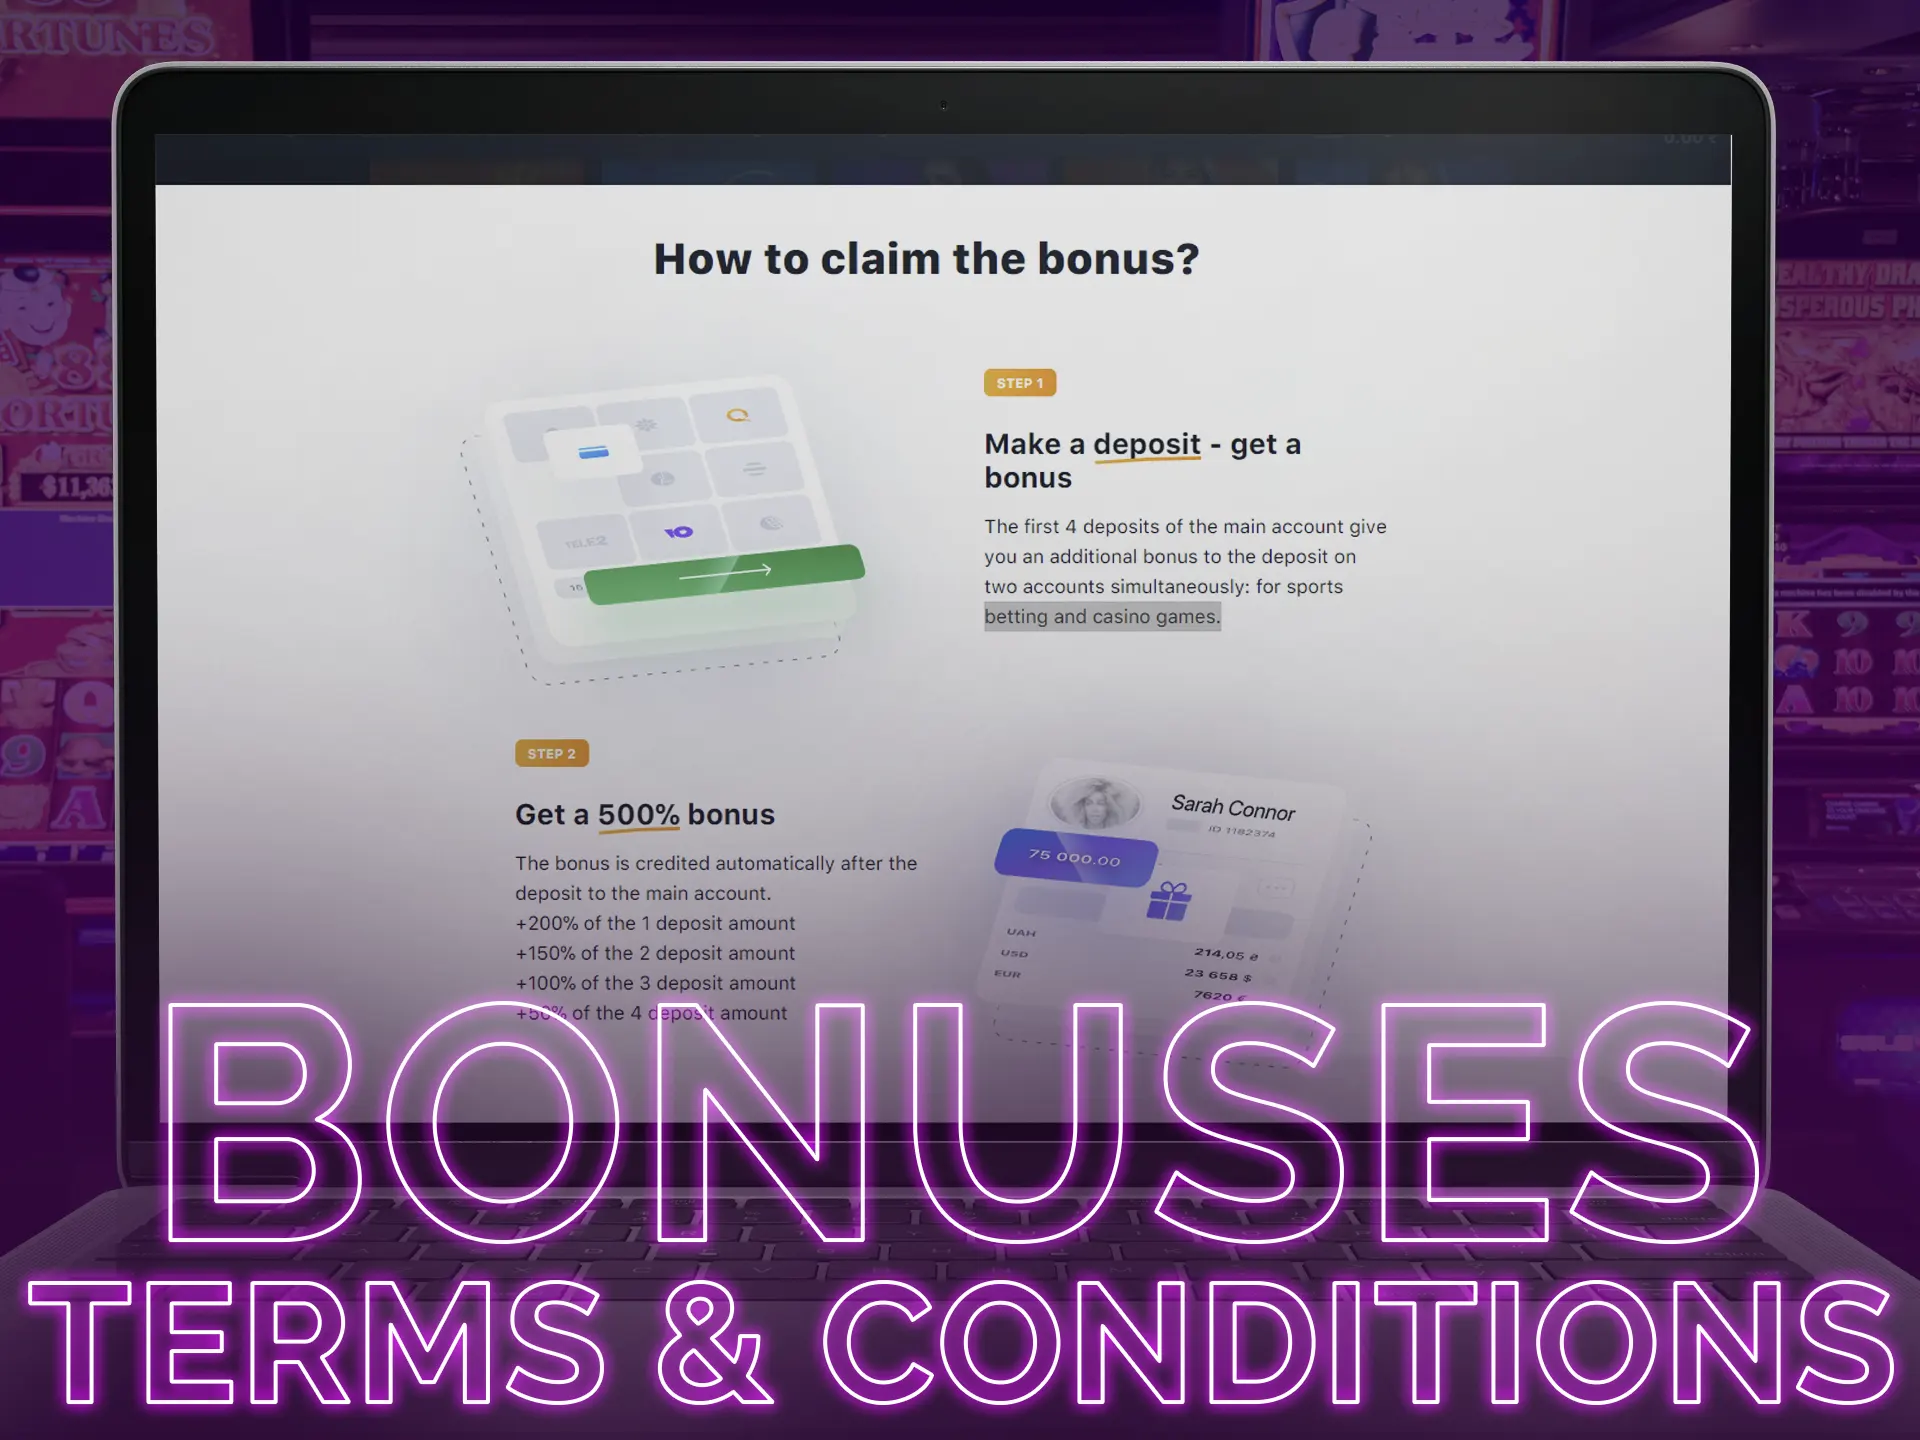 Bonuses come with specific Terms and Conditions, so learn rules for redeeming them below.